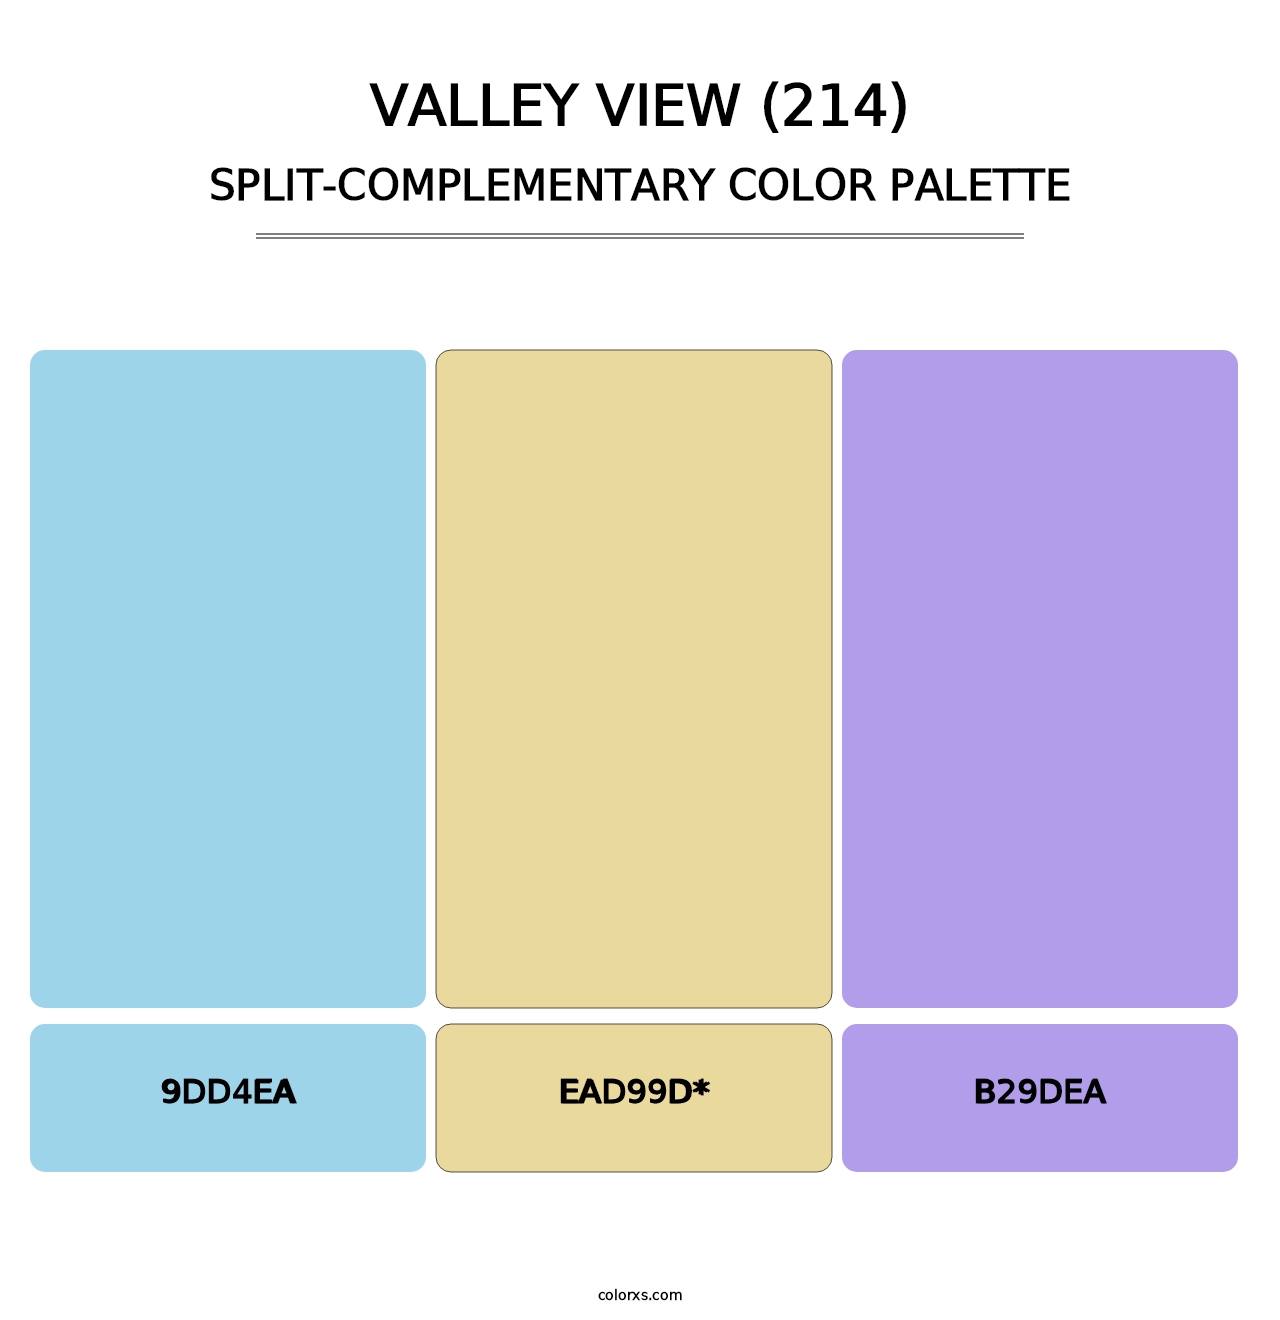 Valley View (214) - Split-Complementary Color Palette